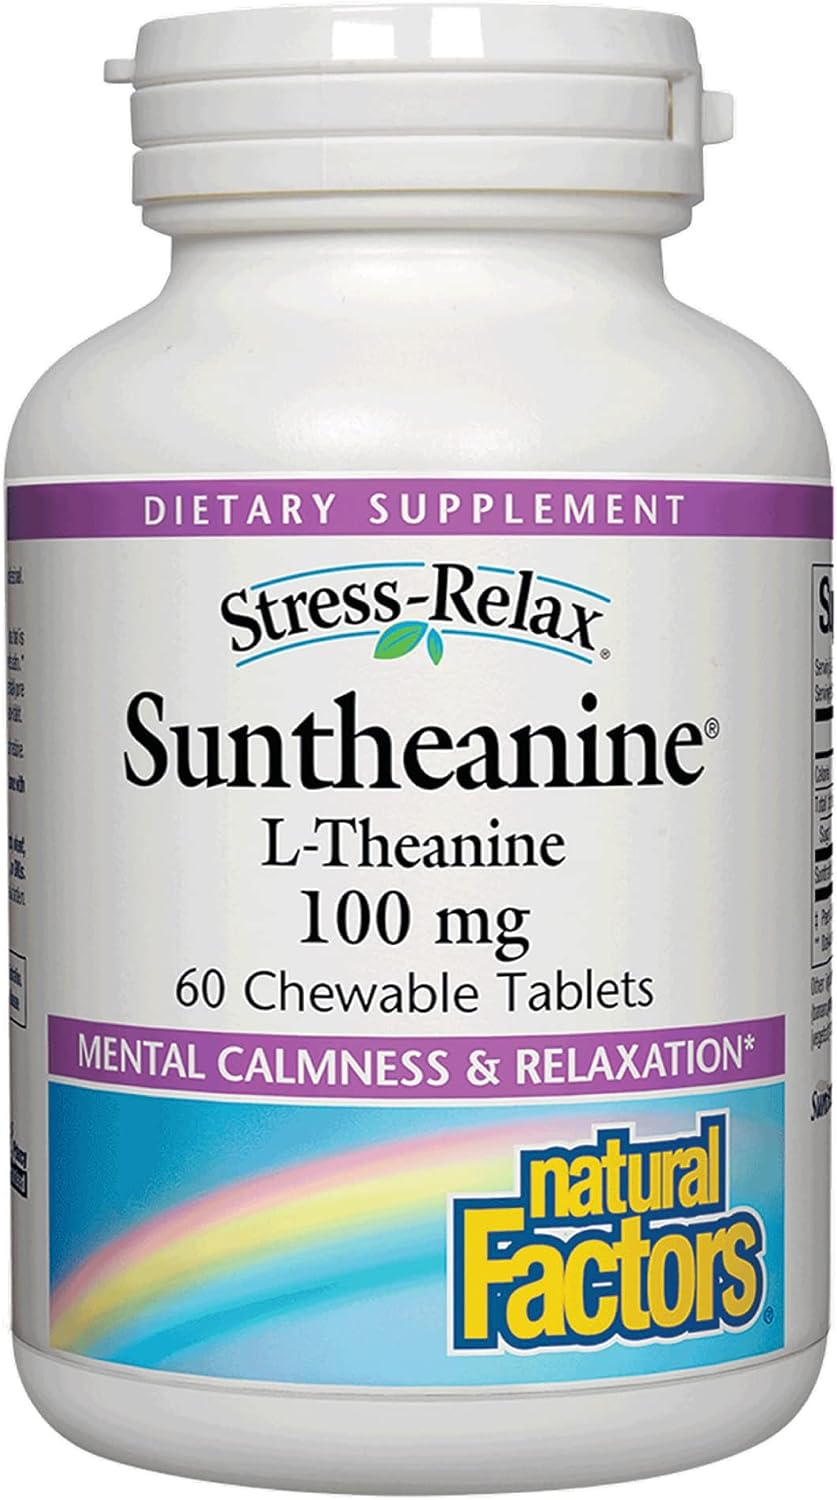 Natural Factors Stress Relax Suntheanine L-Theanine 100mg 60chew